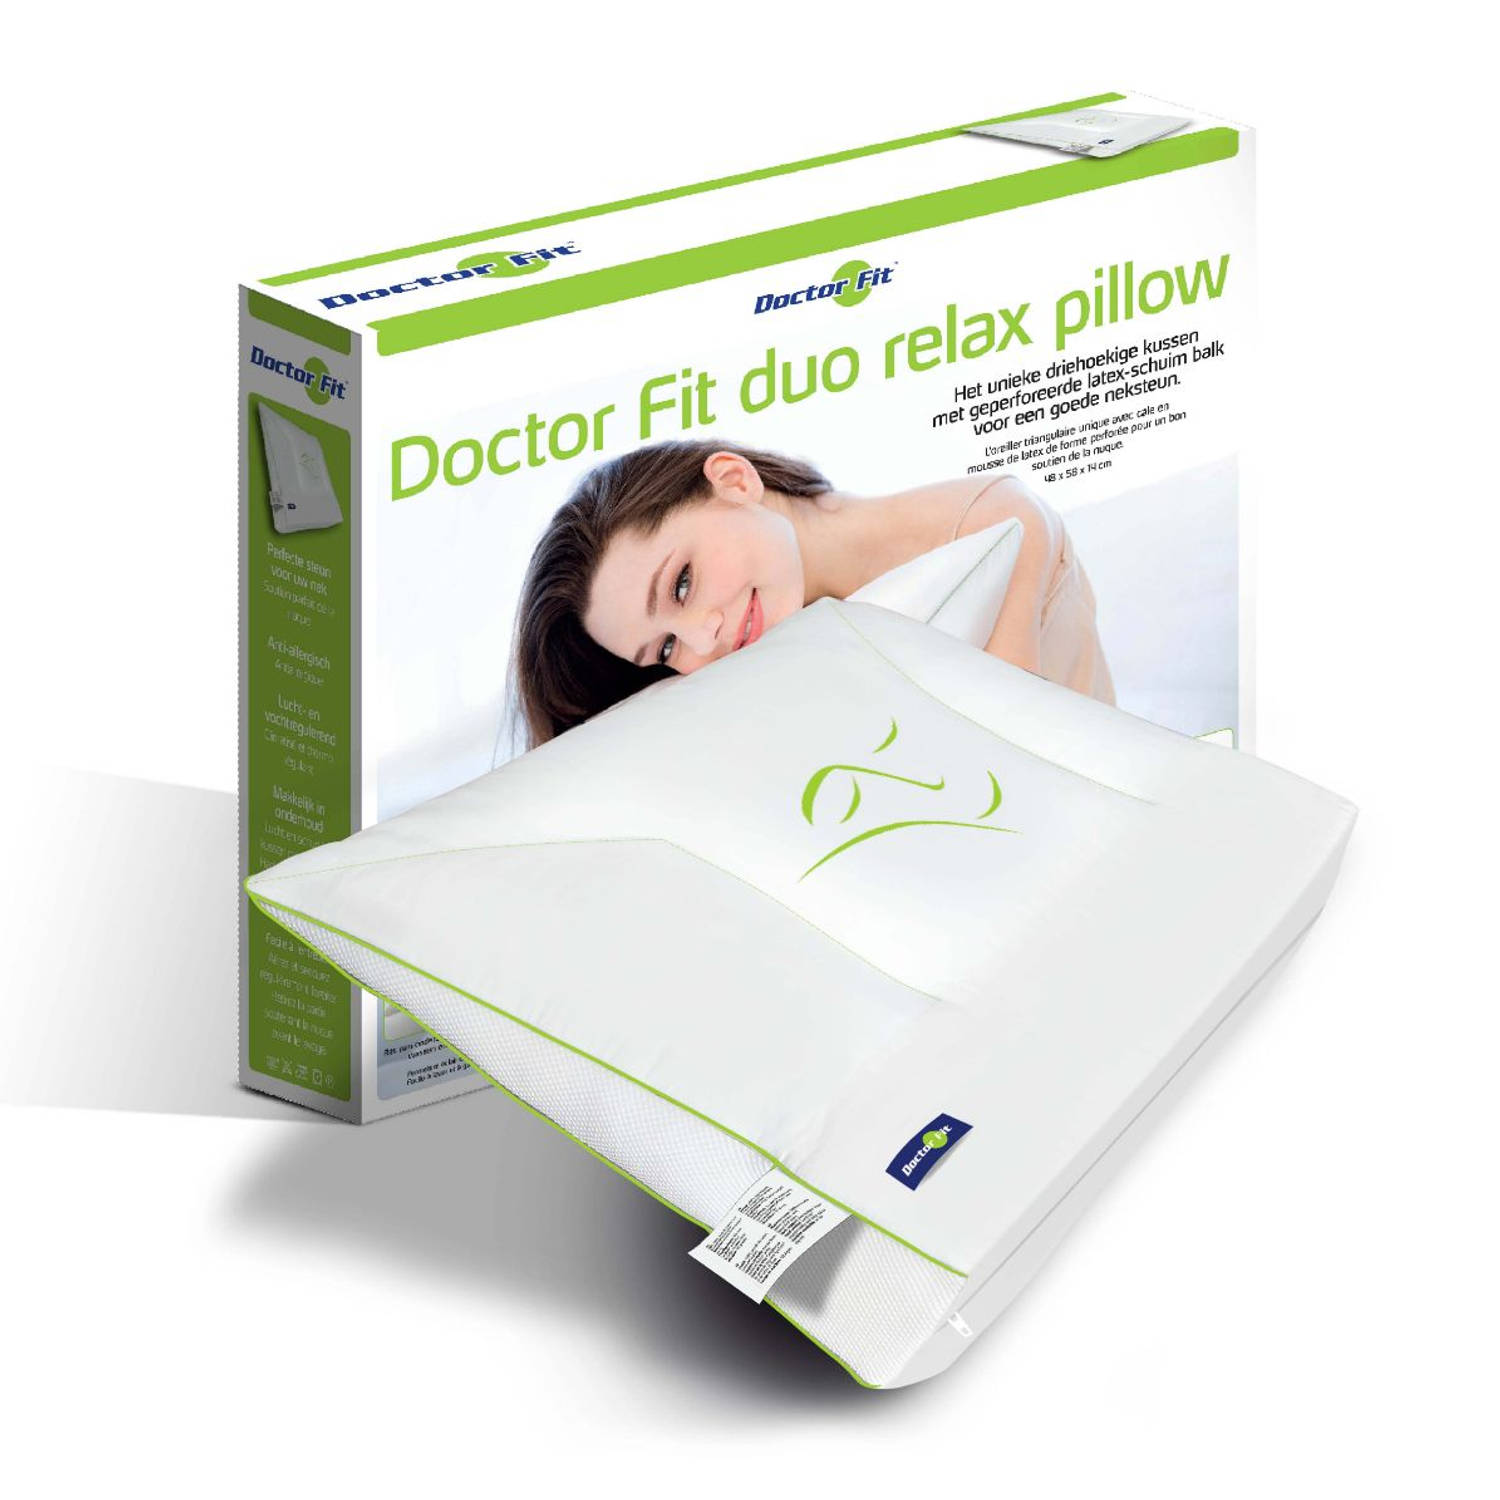 Dr.Fit Green Duo Relax Pillow Neck: Latex w- Latexballs